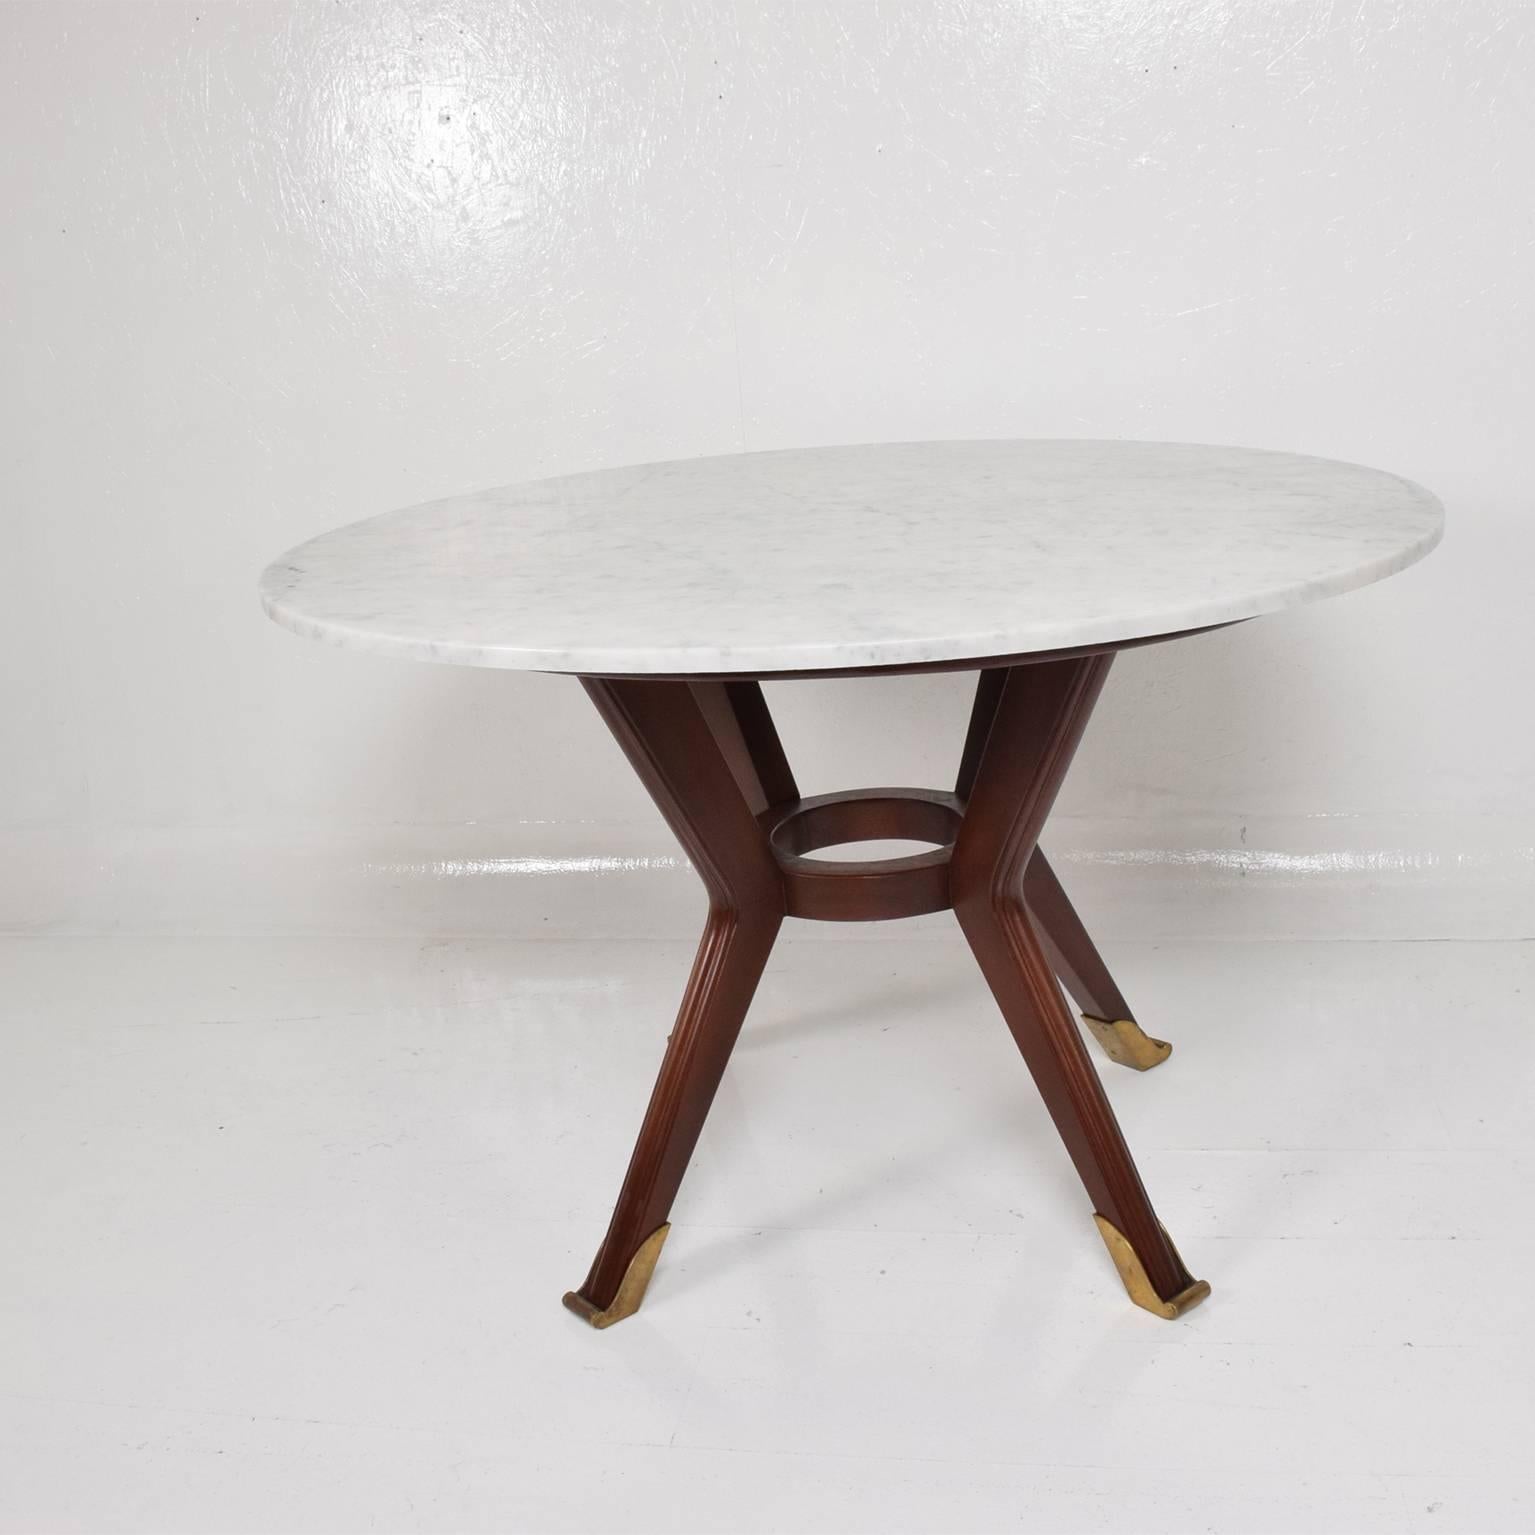 Mexican Modernist Round Dining Table Attributed to Arturo Pani 1